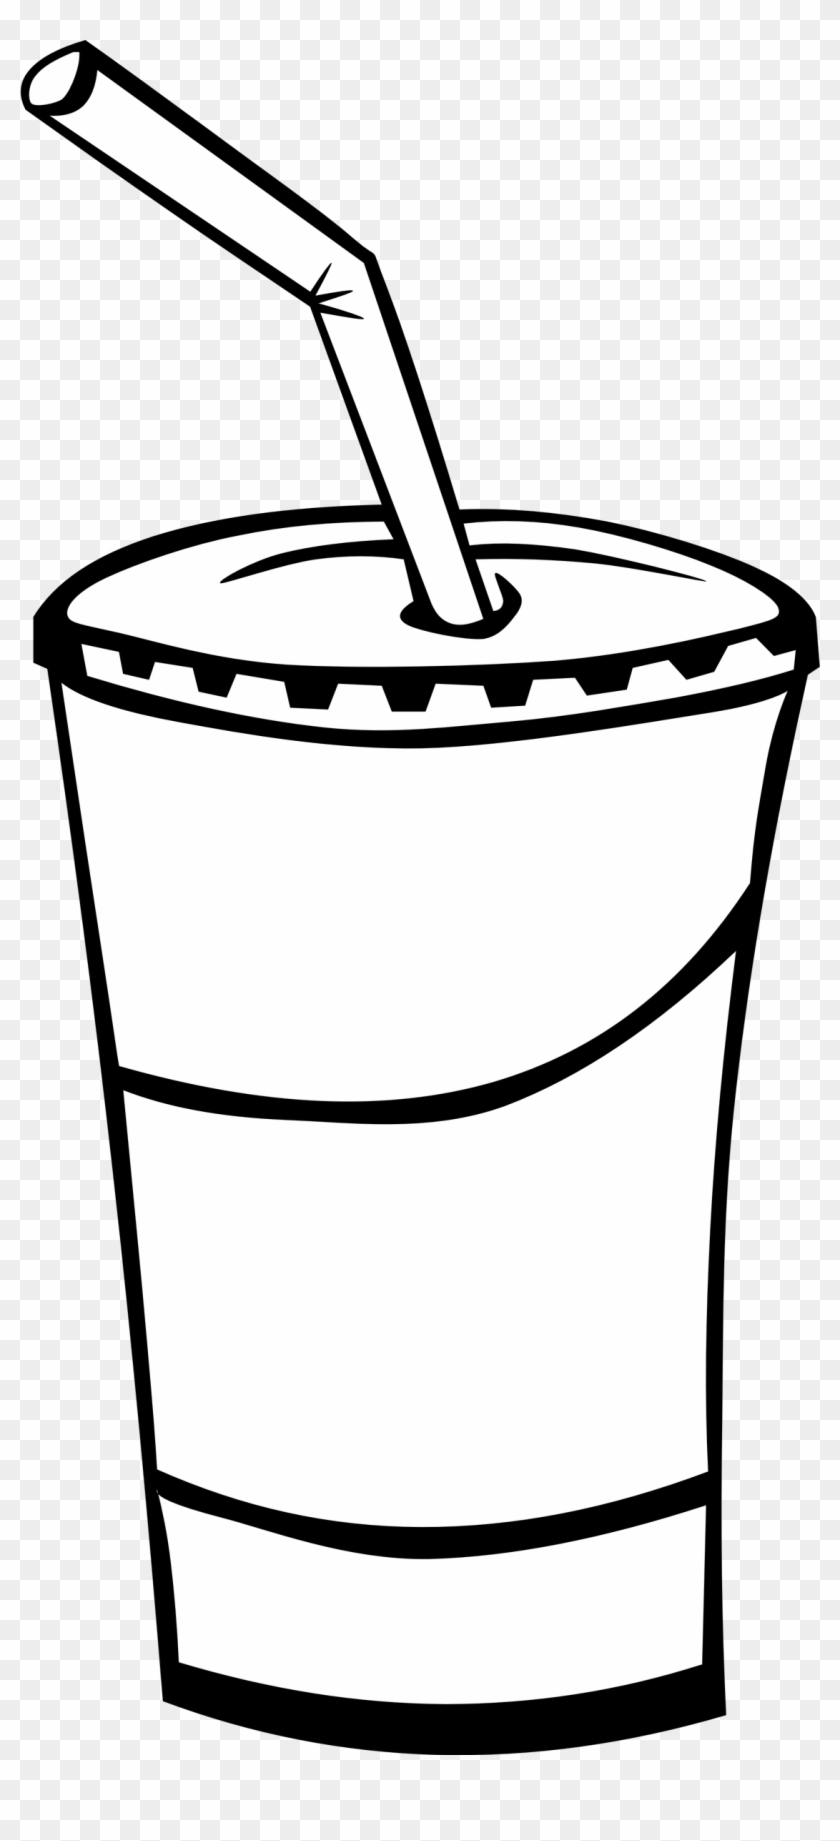 Soft Drinks Clipart Black And White